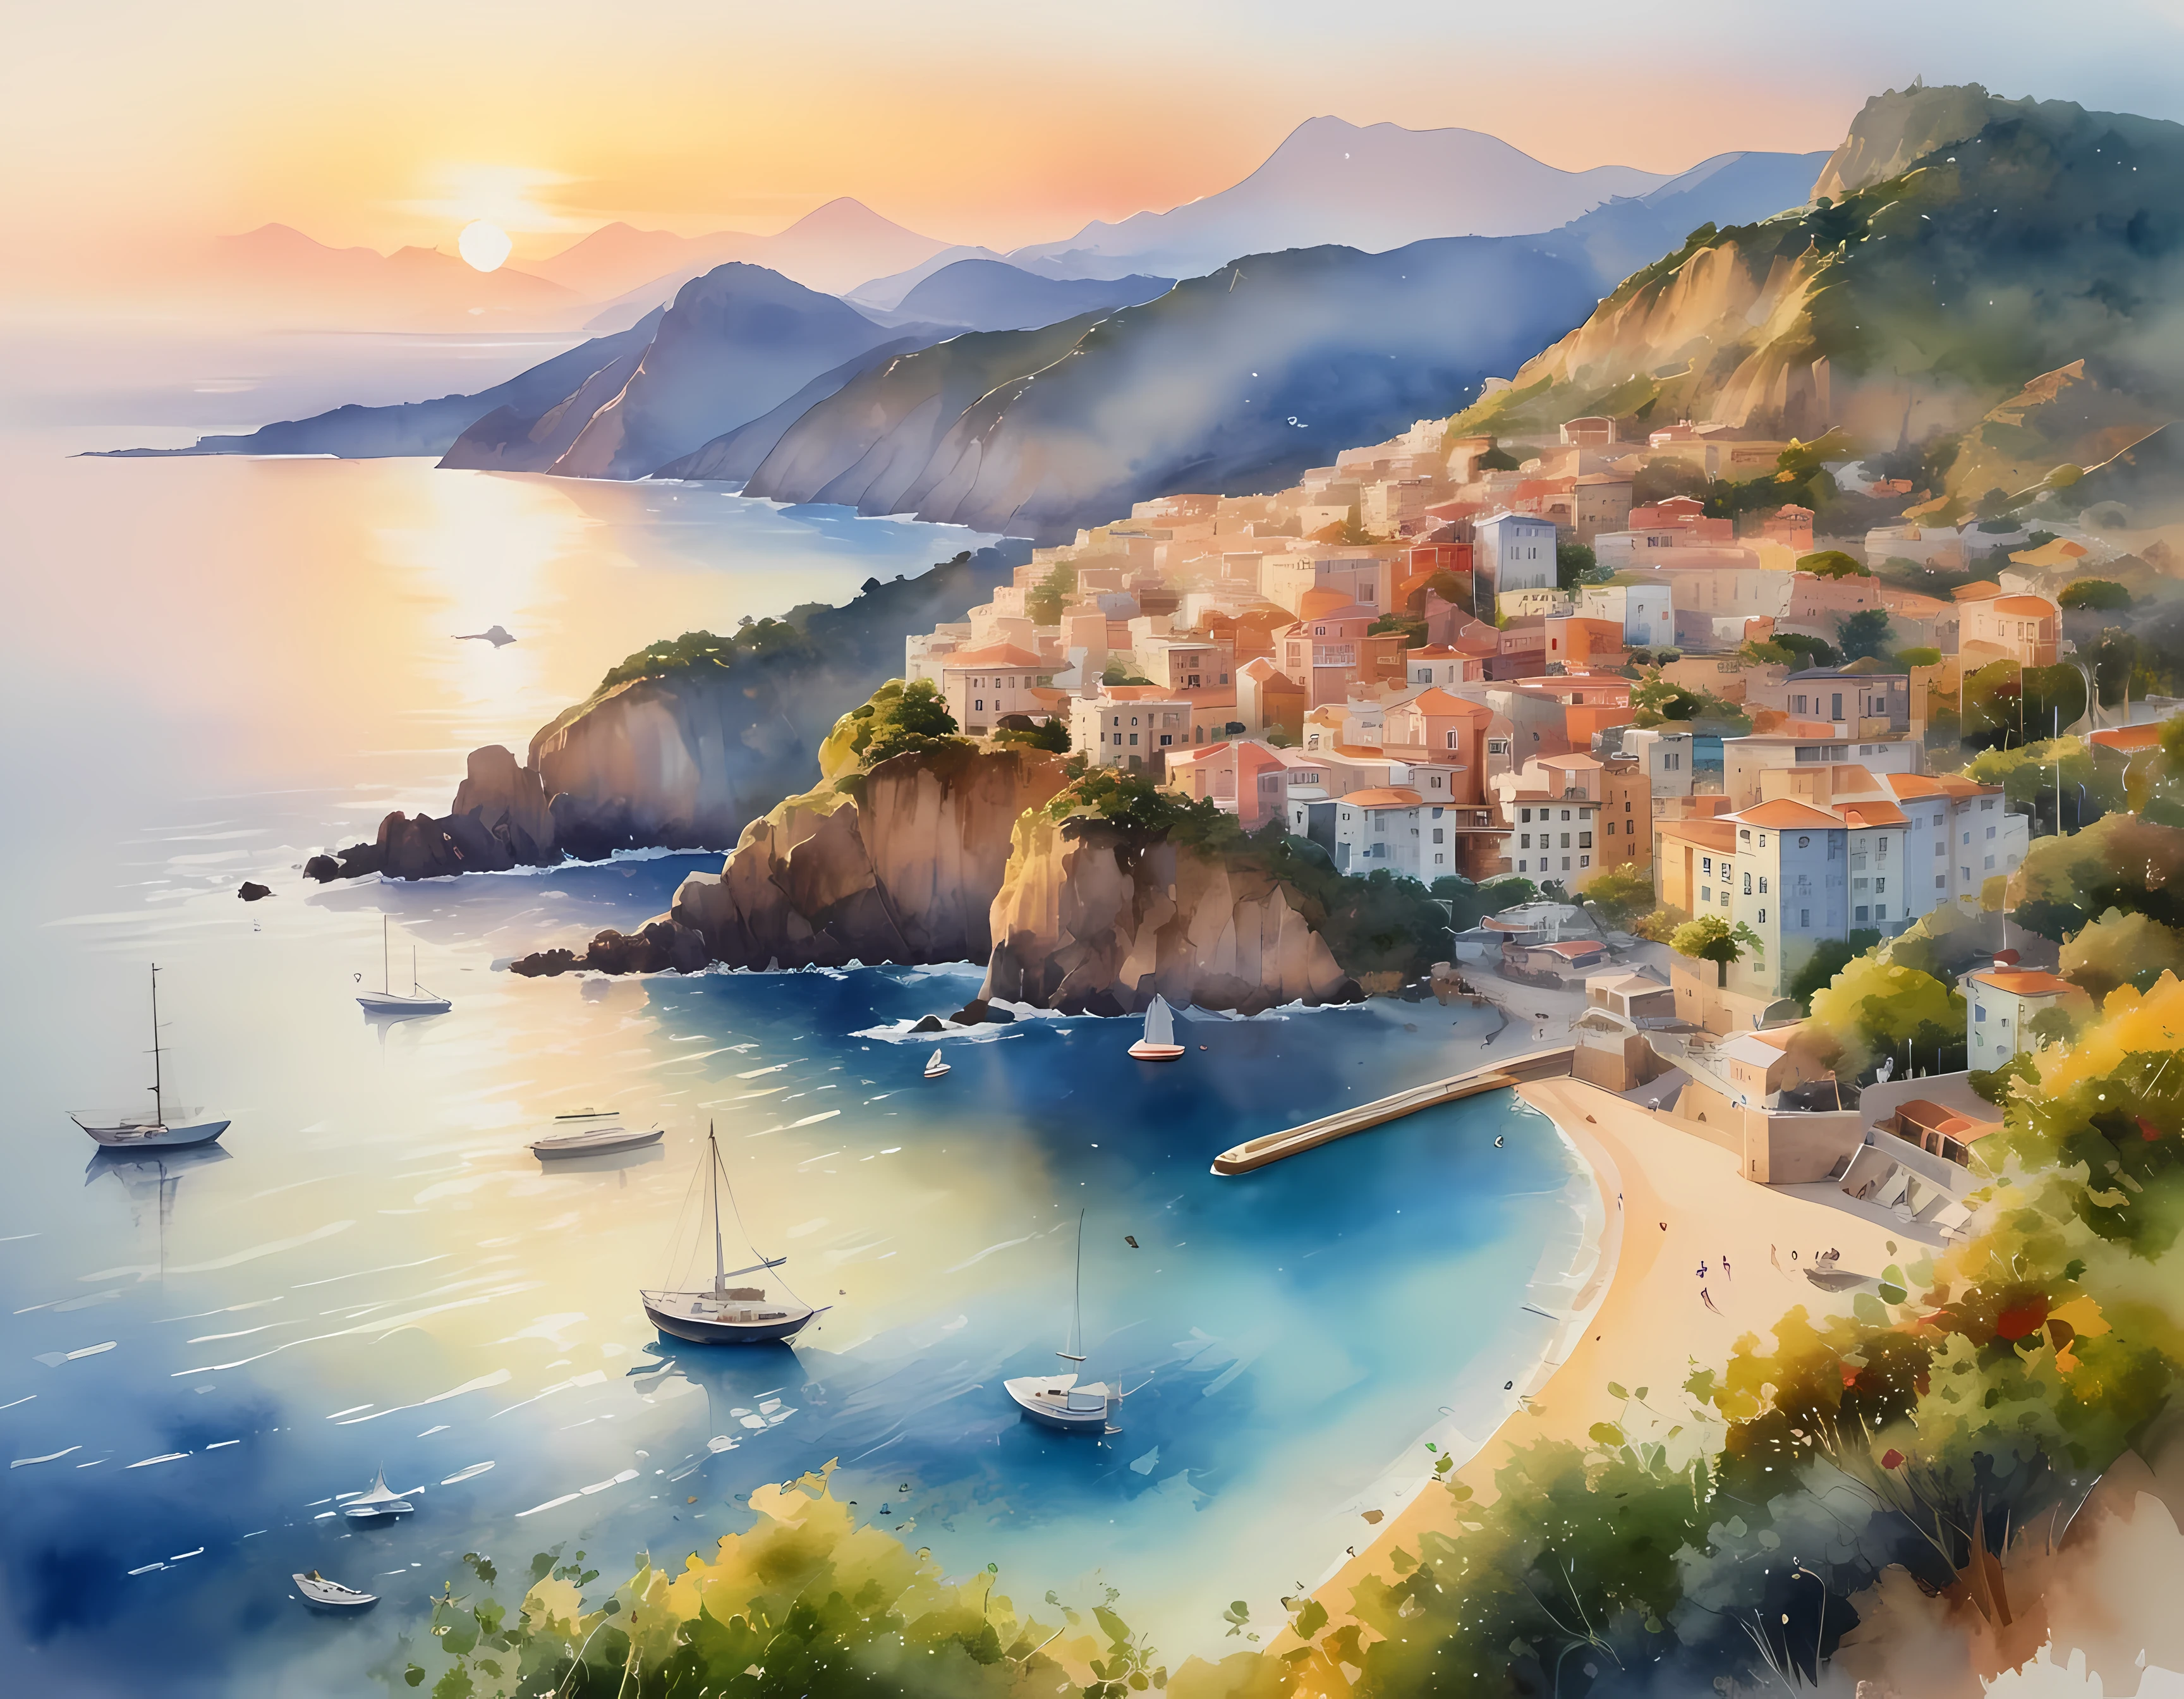 Watercolor painting, masterpiece in maximum 16K resolution, superb quality, a stunning ((aerial view)) of a coastal city nestled between mountains and the ocean, iconic landmarks, vibrant neighborhoods, golden hour lighting and atmospheric haze to create a sense of depth and dimension, intricate details of the buildings and streets, harmonious color scheme. | ((More_Detail))